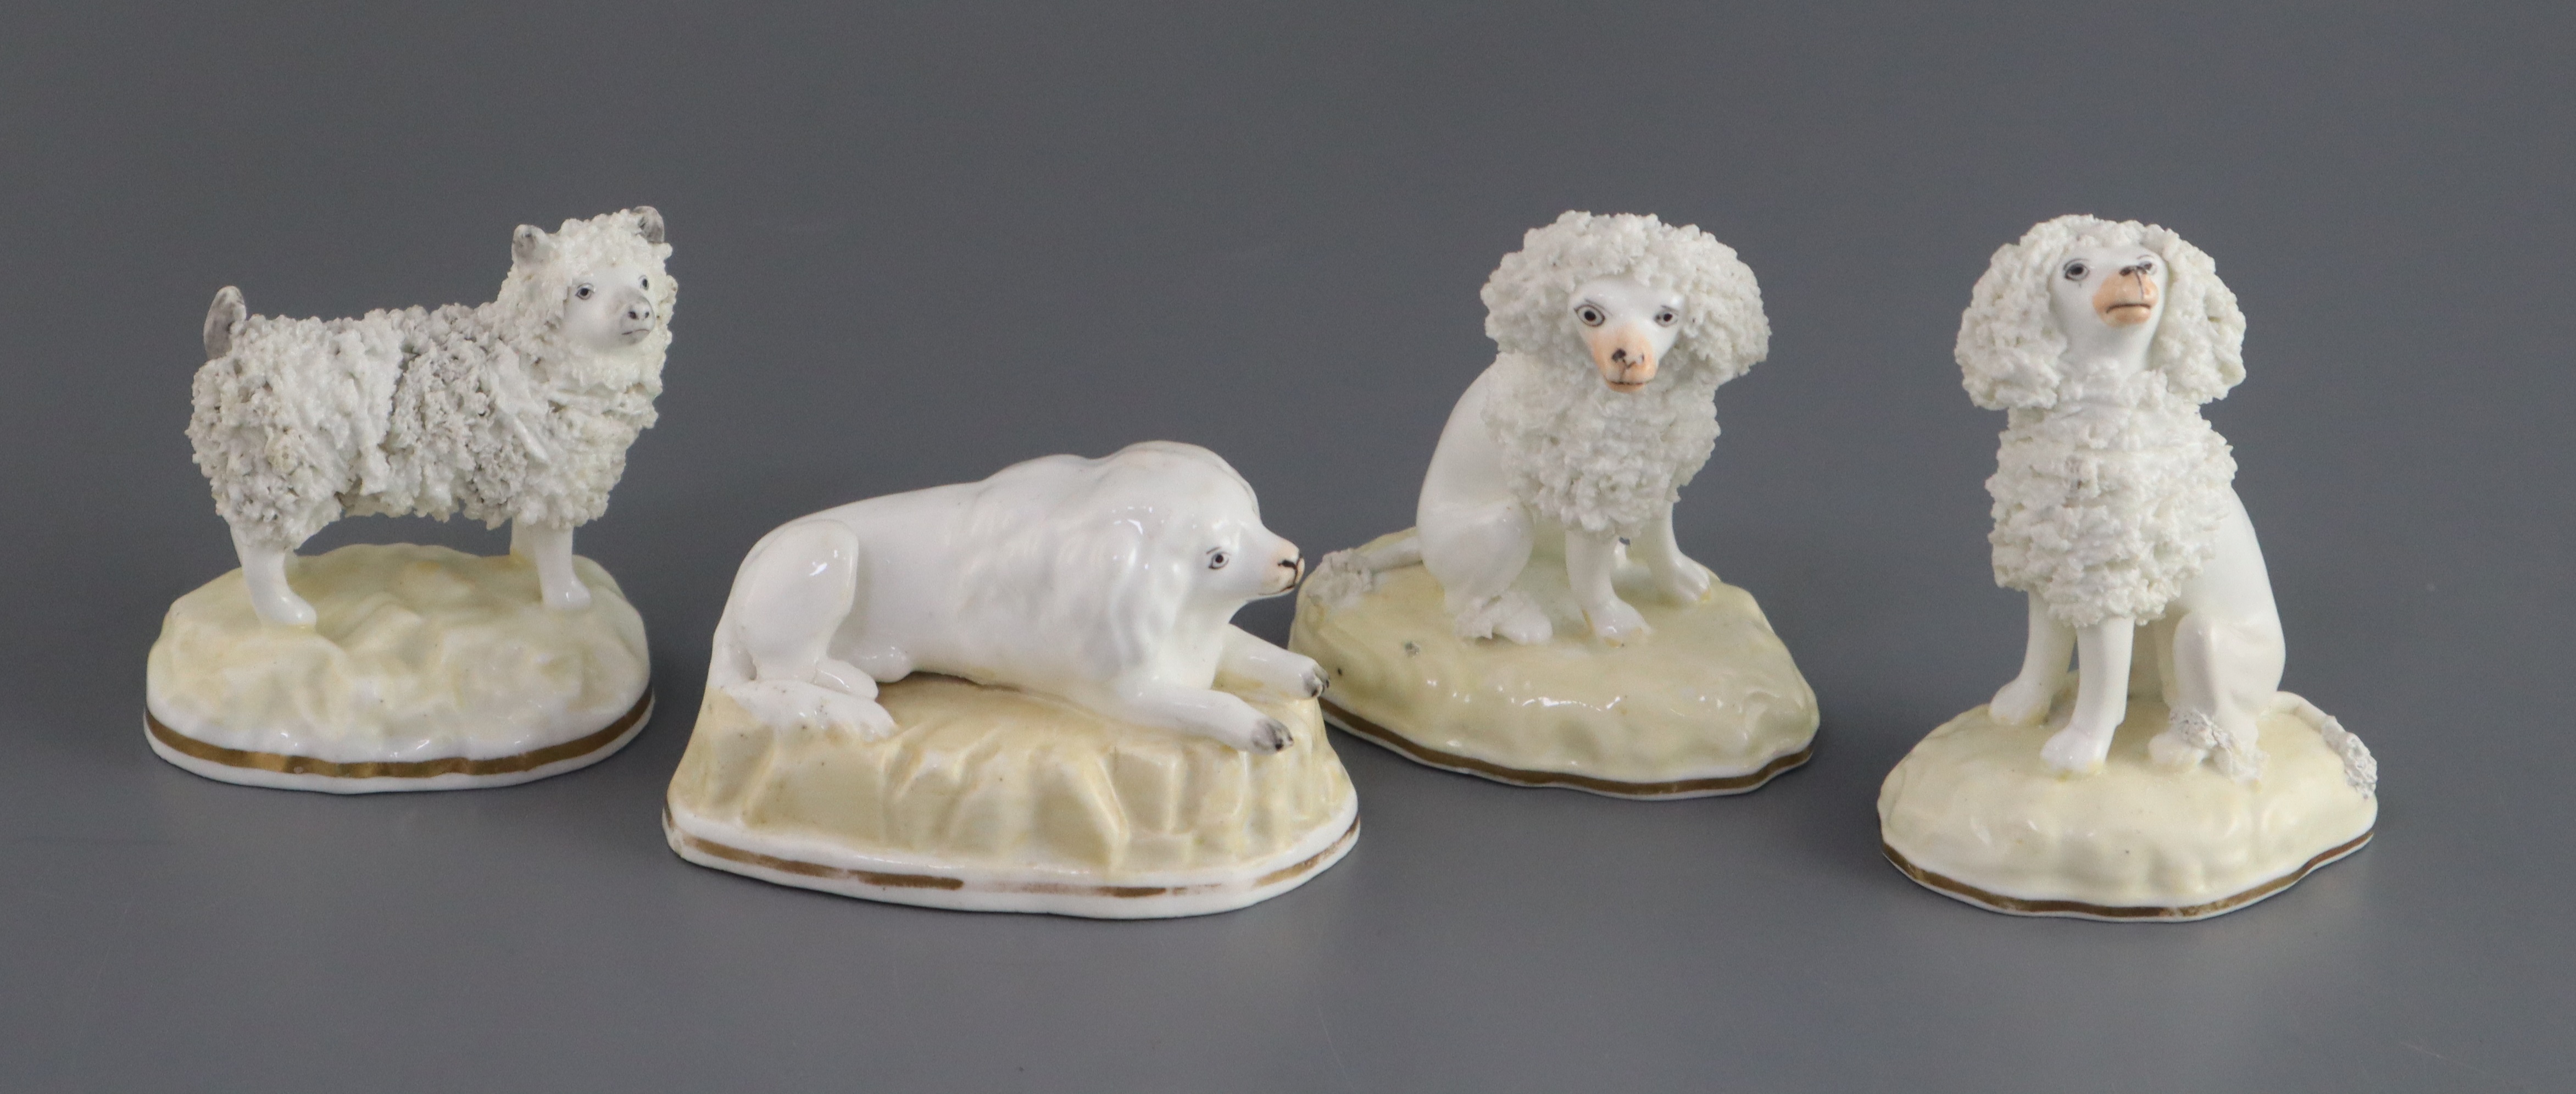 Four Samuel Alcock porcelain figures of poodles, c.1835-50, each on a yellow coloured rocky base,